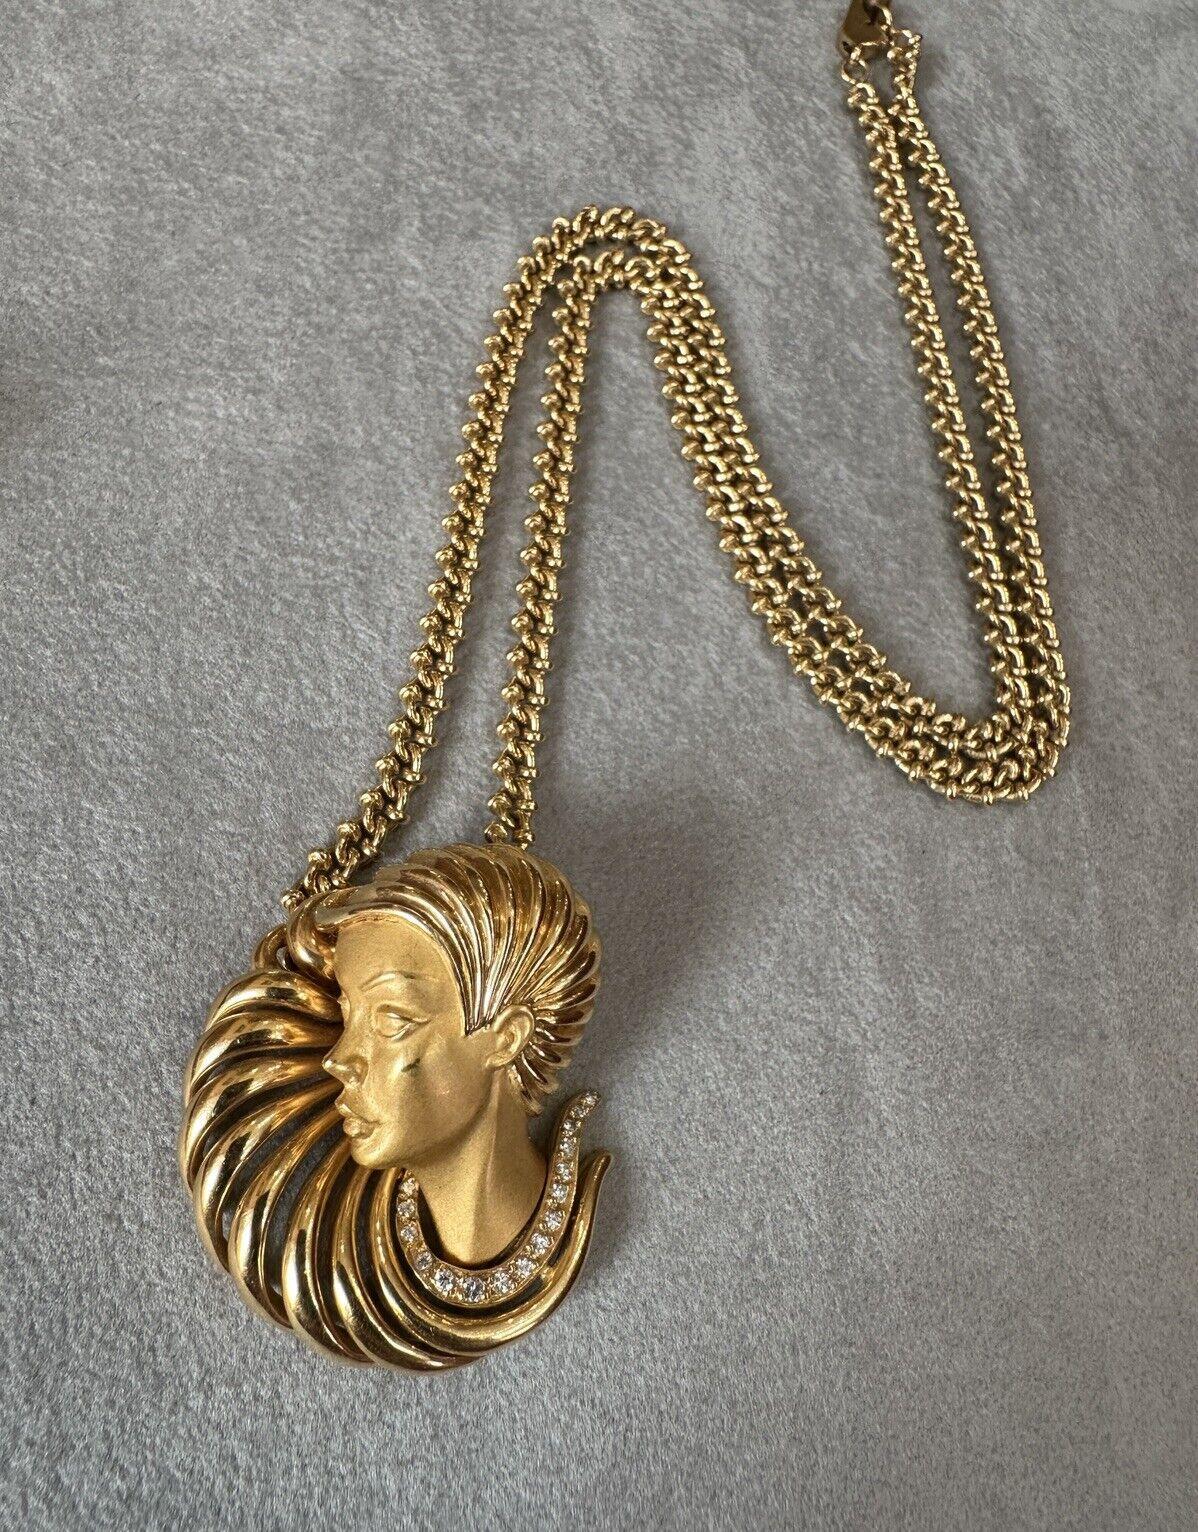 Carrera y Carrera Sculpted Lady's Face Pendant Necklace in 18k Yellow Gold In Excellent Condition For Sale In La Jolla, CA